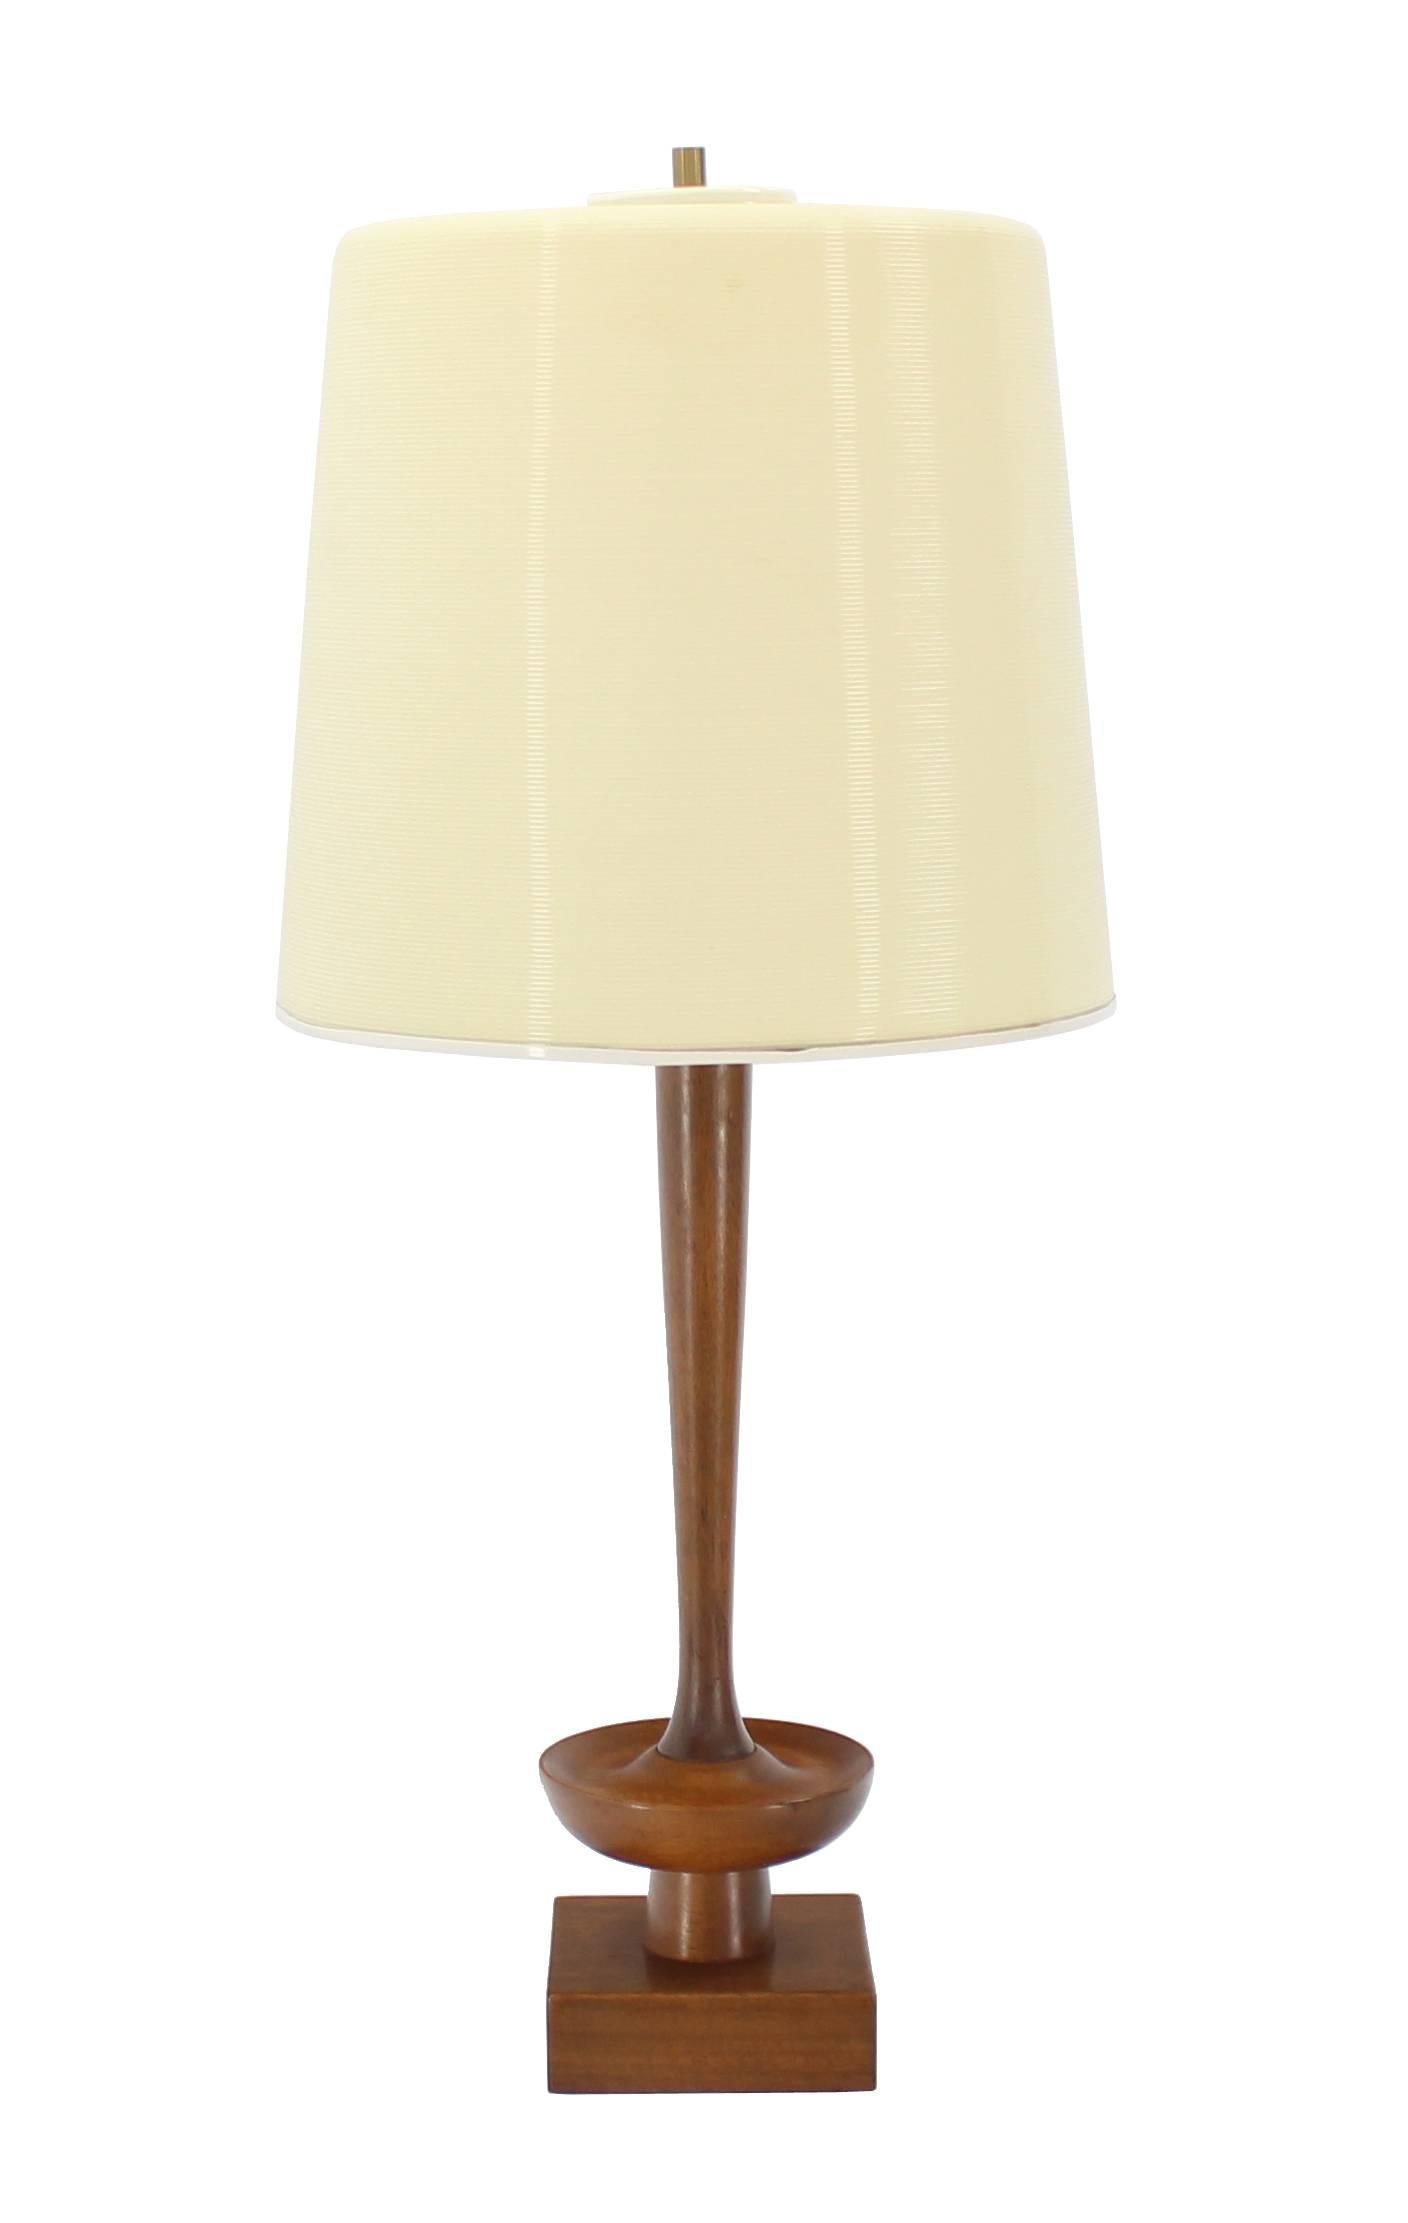 Mid-Century Modern Turned Table Lamp by Heifetz In Excellent Condition For Sale In Rockaway, NJ